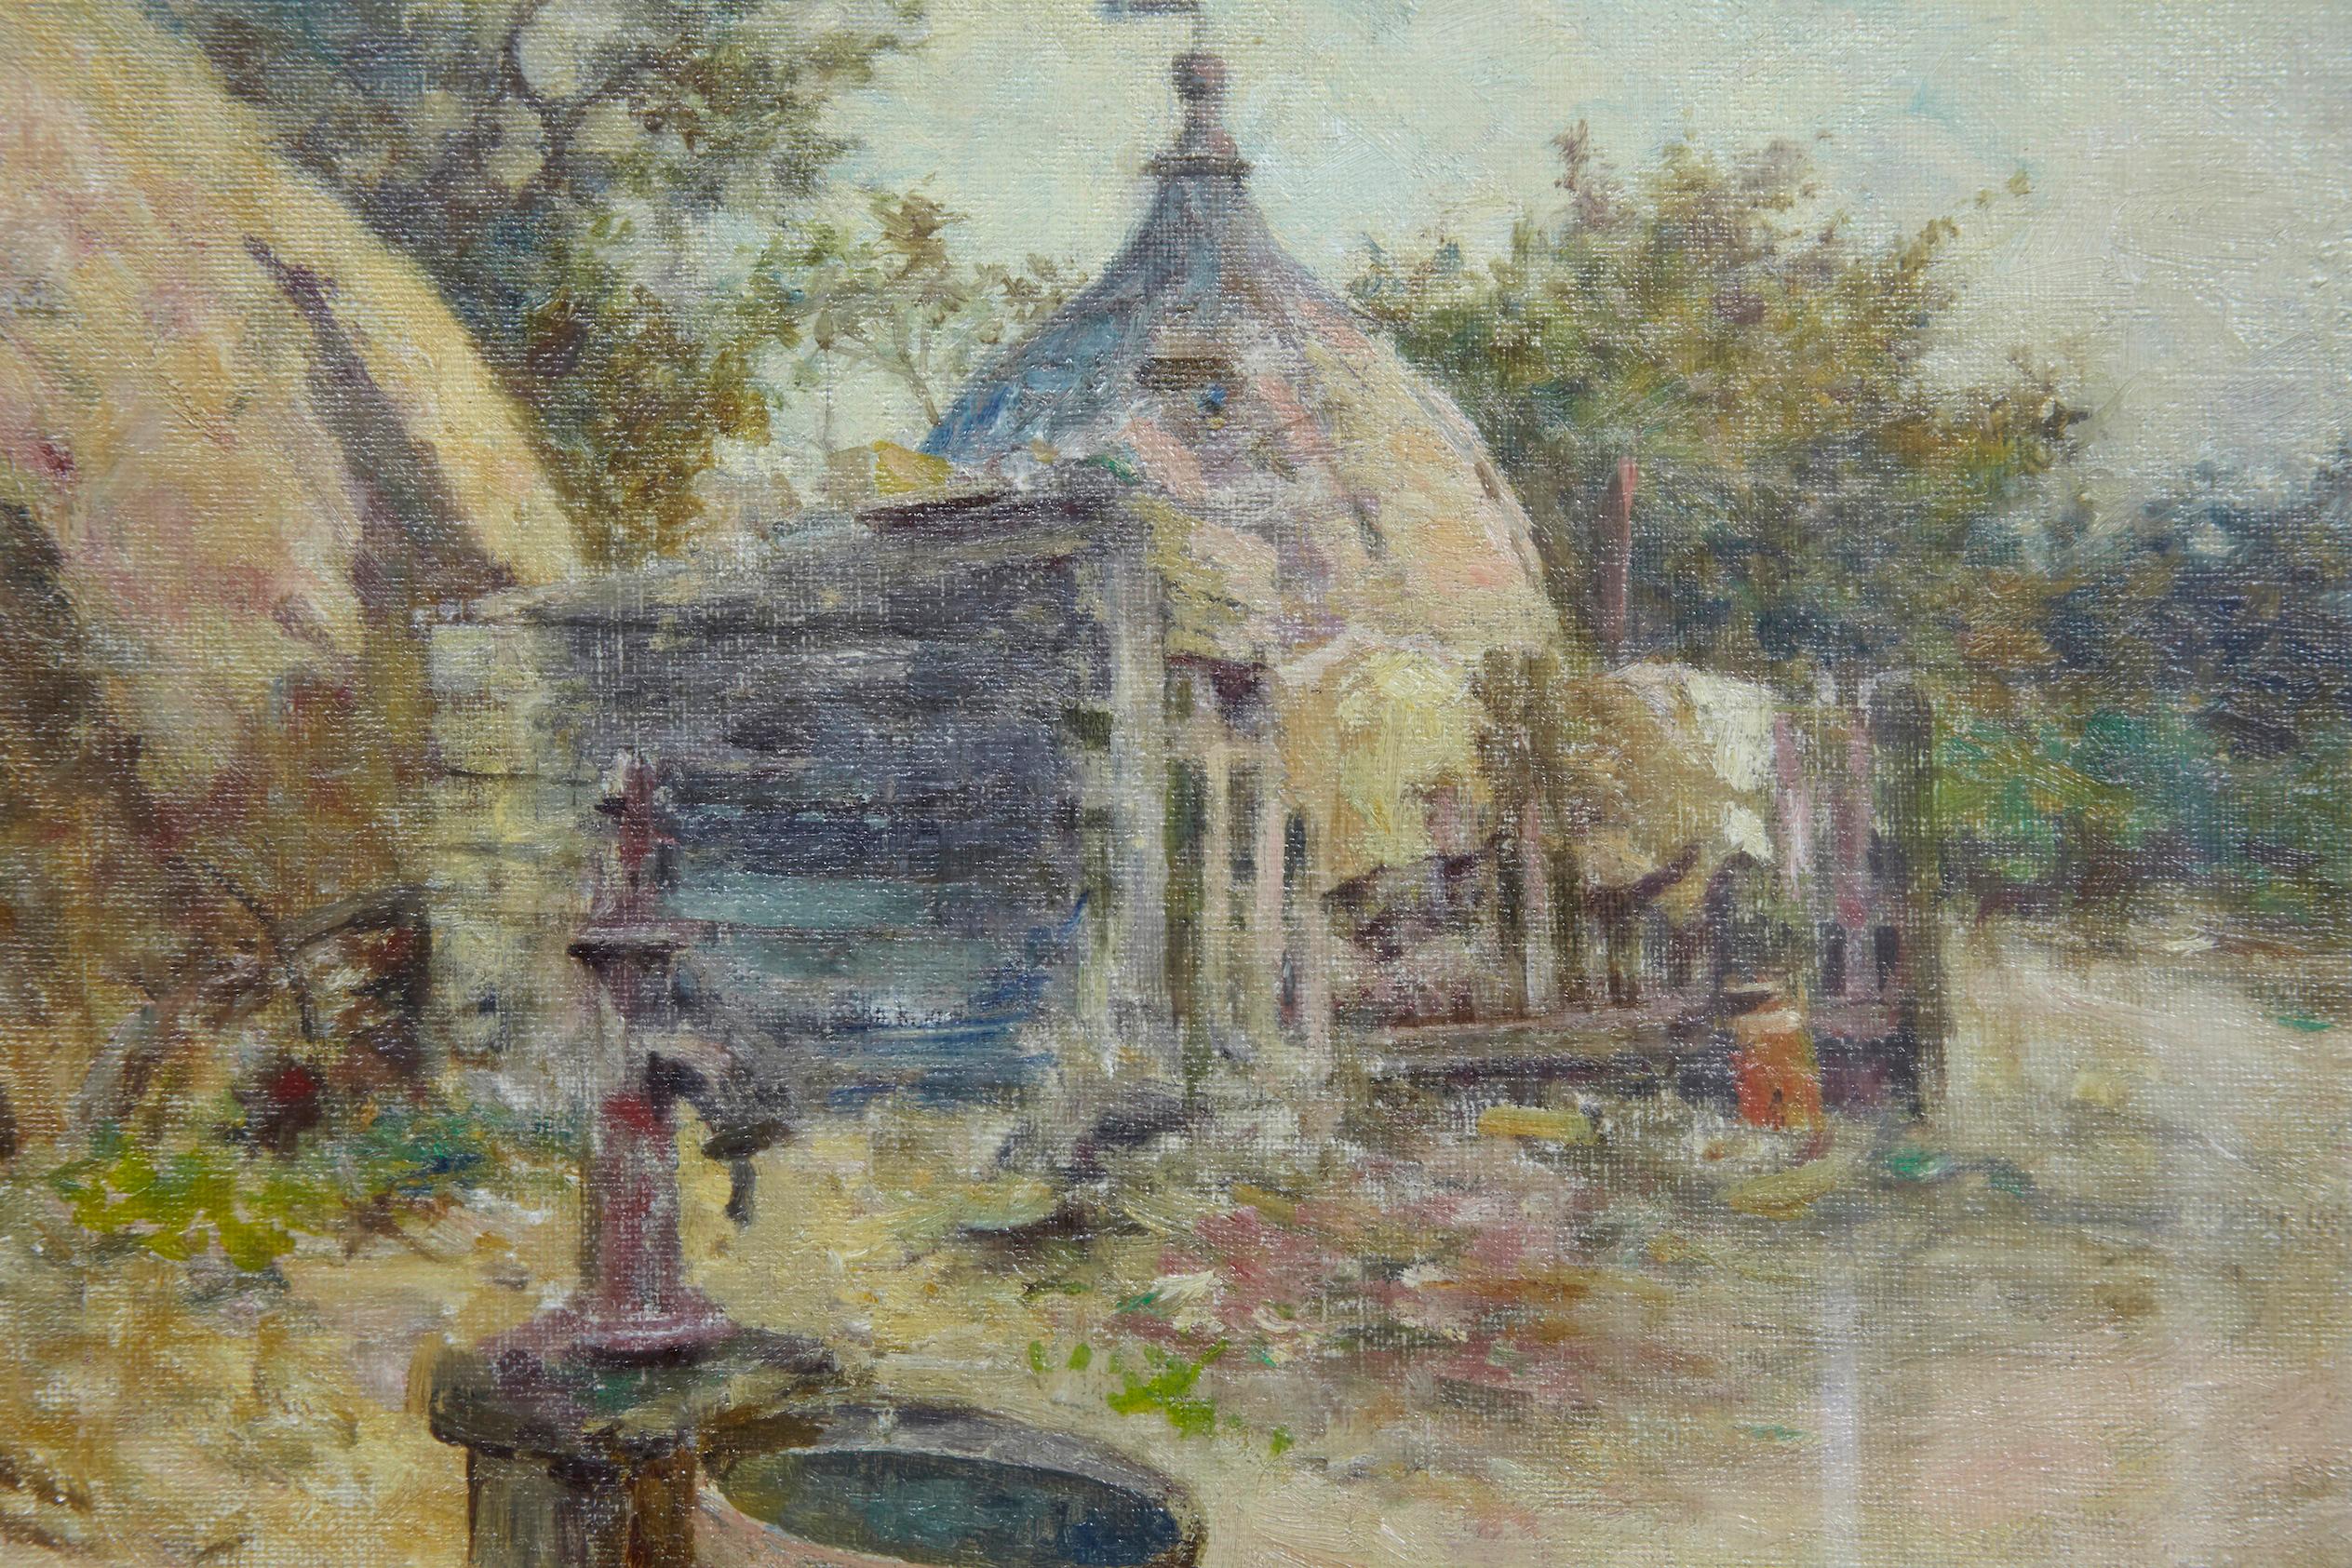 Hand-Painted Robert McGregor Genre Oil Painting of French Village Scene